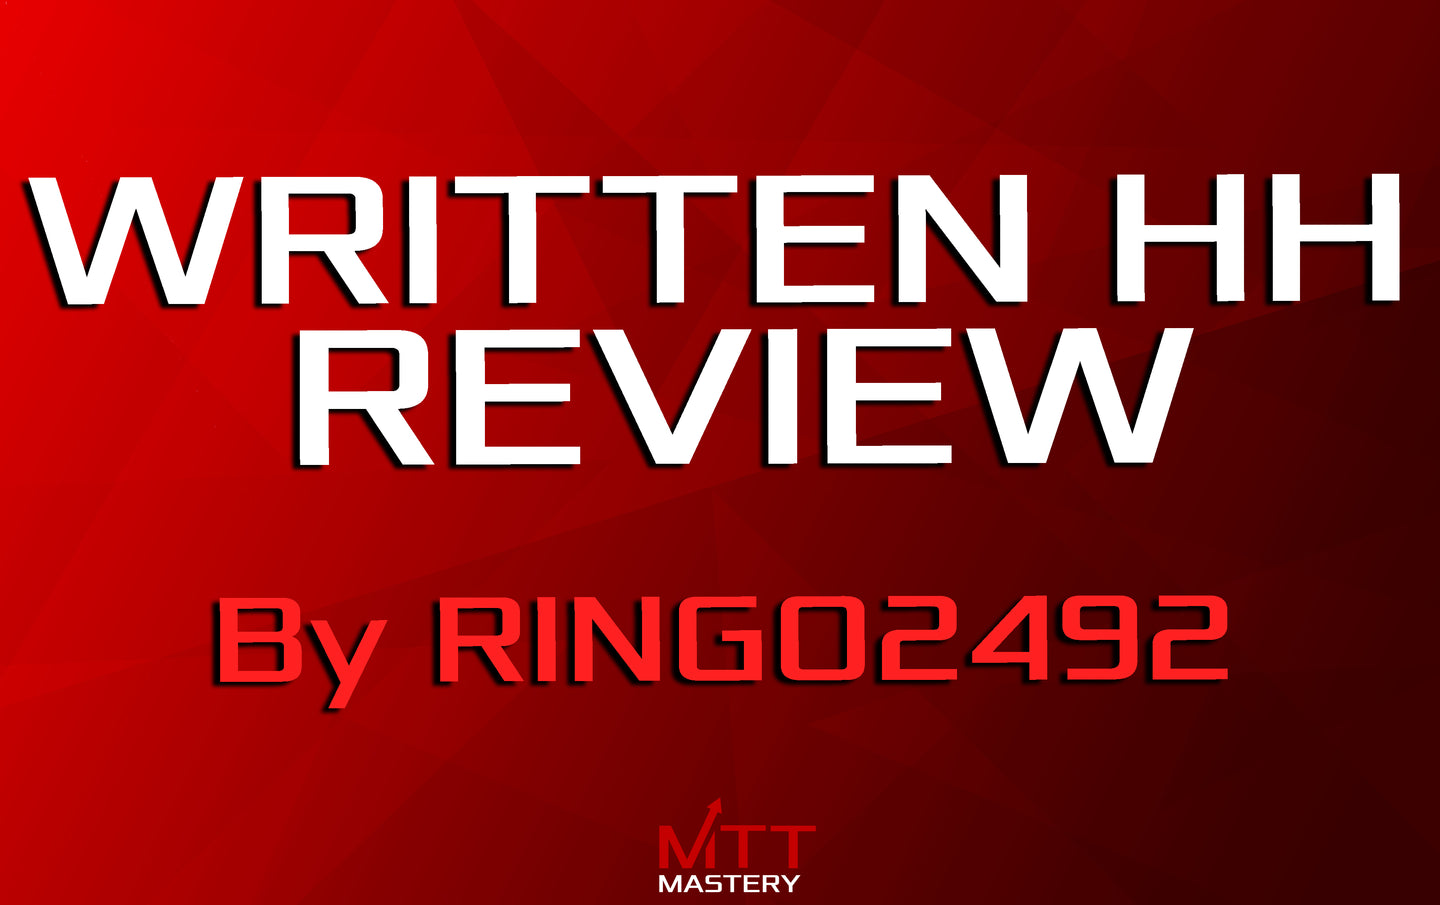 Written Hand History Review by Ringo2492